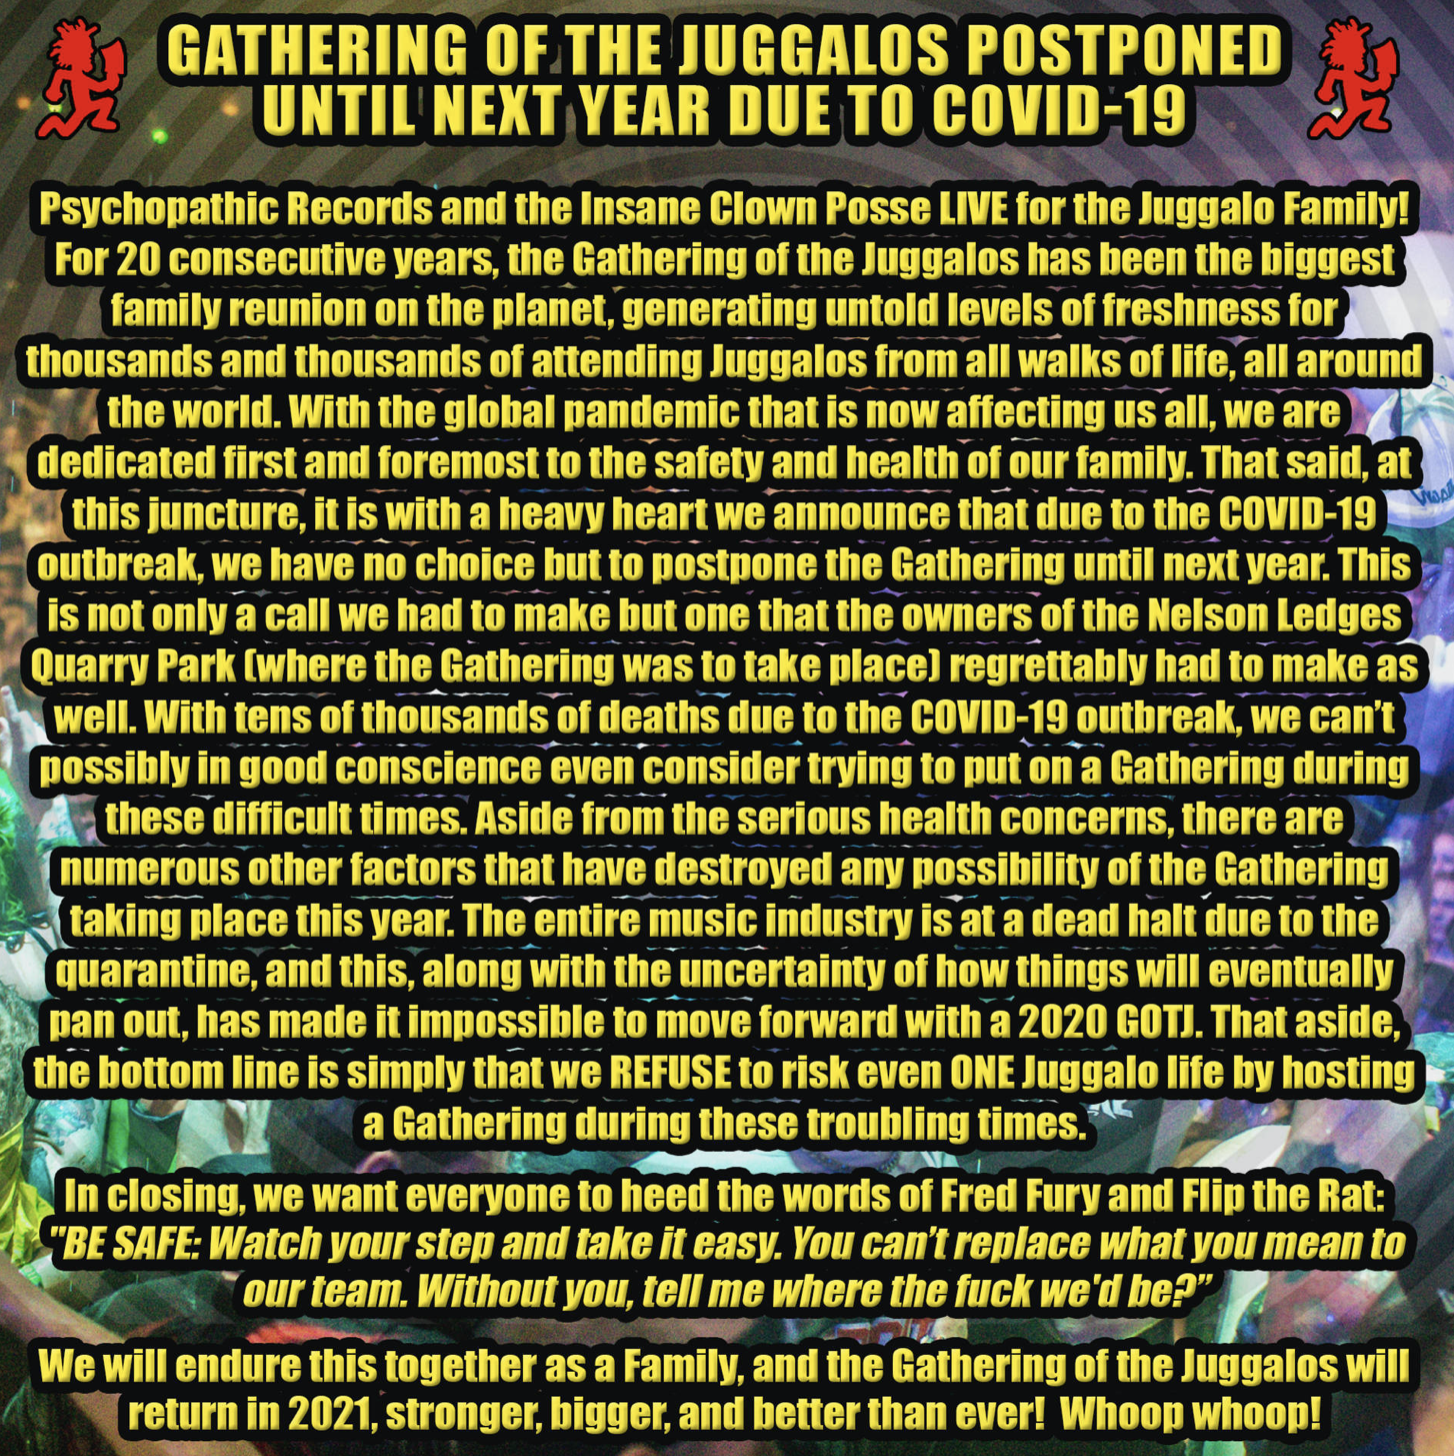 🤡Insane Clown Posse Lauded For Postponing the 2020 Gathering of The Juggalos 🤡